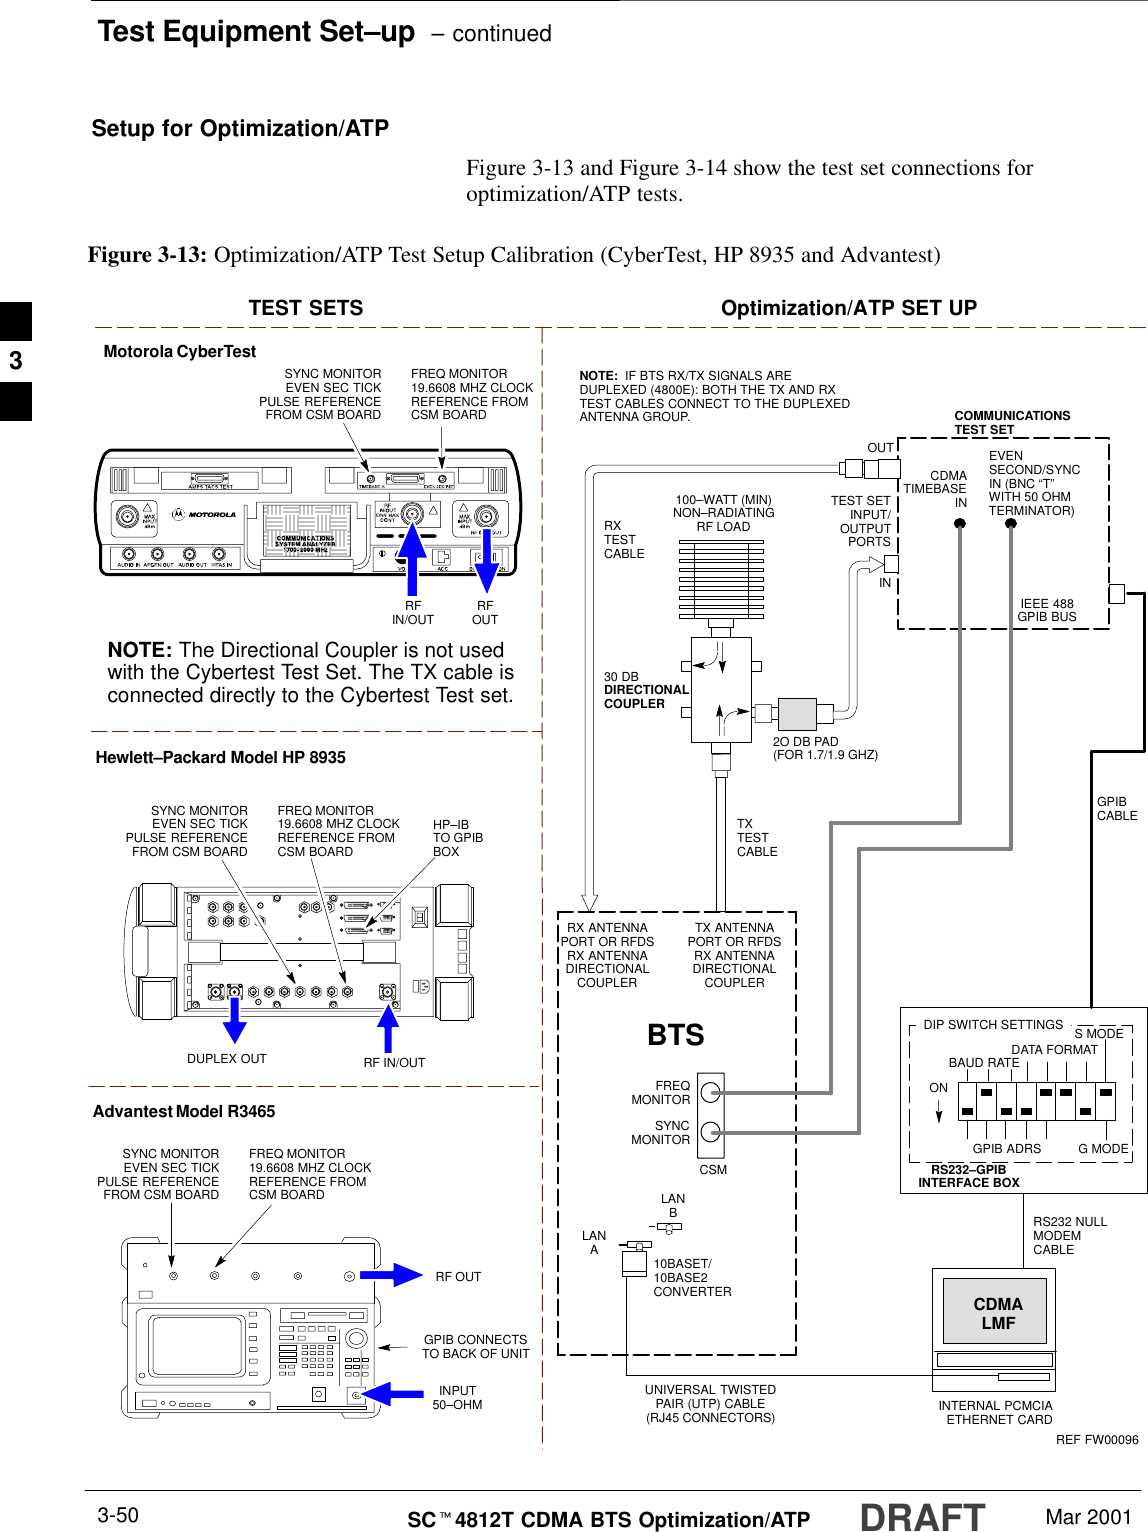 Test Equipment Set–up  – continuedDRAFTSCt4812T CDMA BTS Optimization/ATP Mar 20013-50Setup for Optimization/ATPFigure 3-13 and Figure 3-14 show the test set connections foroptimization/ATP tests.Motorola CyberTestHewlett–Packard Model HP 8935DUPLEX OUTTEST SETS Optimization/ATP SET UPRFIN/OUTSYNC MONITOREVEN SEC TICKPULSE REFERENCEFROM CSM BOARDFREQ MONITOR19.6608 MHZ CLOCKREFERENCE FROMCSM BOARDRF IN/OUTHP–IBTO GPIBBOXAdvantest Model R3465INPUT50–OHMGPIB CONNECTSTO BACK OF UNITNOTE: The Directional Coupler is not usedwith the Cybertest Test Set. The TX cable isconnected directly to the Cybertest Test set.RF OUTRX ANTENNAPORT OR RFDSRX ANTENNADIRECTIONALCOUPLERTX ANTENNAPORT OR RFDSRX ANTENNADIRECTIONALCOUPLERRS232–GPIBINTERFACE BOXINTERNAL PCMCIAETHERNET CARDGPIBCABLEUNIVERSAL TWISTEDPAIR (UTP) CABLE(RJ45 CONNECTORS)RS232 NULLMODEMCABLES MODEDATA FORMATBAUD RATEGPIB ADRS G MODEONBTSTXTESTCABLECDMALMFDIP SWITCH SETTINGS10BASET/10BASE2CONVERTERLANBLANARXTESTCABLECOMMUNICATIONSTEST SETIEEE 488GPIB BUSINTEST SETINPUT/OUTPUTPORTSOUTNOTE:  IF BTS RX/TX SIGNALS AREDUPLEXED (4800E): BOTH THE TX AND RXTEST CABLES CONNECT TO THE DUPLEXEDANTENNA GROUP.100–WATT (MIN)NON–RADIATINGRF LOAD2O DB PAD(FOR 1.7/1.9 GHZ)30 DBDIRECTIONALCOUPLEREVENSECOND/SYNCIN (BNC “T”WITH 50 OHMTERMINATOR)CDMATIMEBASE INFREQMONITORSYNCMONITORCSMREF FW00096Figure 3-13: Optimization/ATP Test Setup Calibration (CyberTest, HP 8935 and Advantest)SYNC MONITOREVEN SEC TICKPULSE REFERENCEFROM CSM BOARDFREQ MONITOR19.6608 MHZ CLOCKREFERENCE FROMCSM BOARDSYNC MONITOREVEN SEC TICKPULSE REFERENCEFROM CSM BOARDFREQ MONITOR19.6608 MHZ CLOCKREFERENCE FROMCSM BOARDRFOUT3